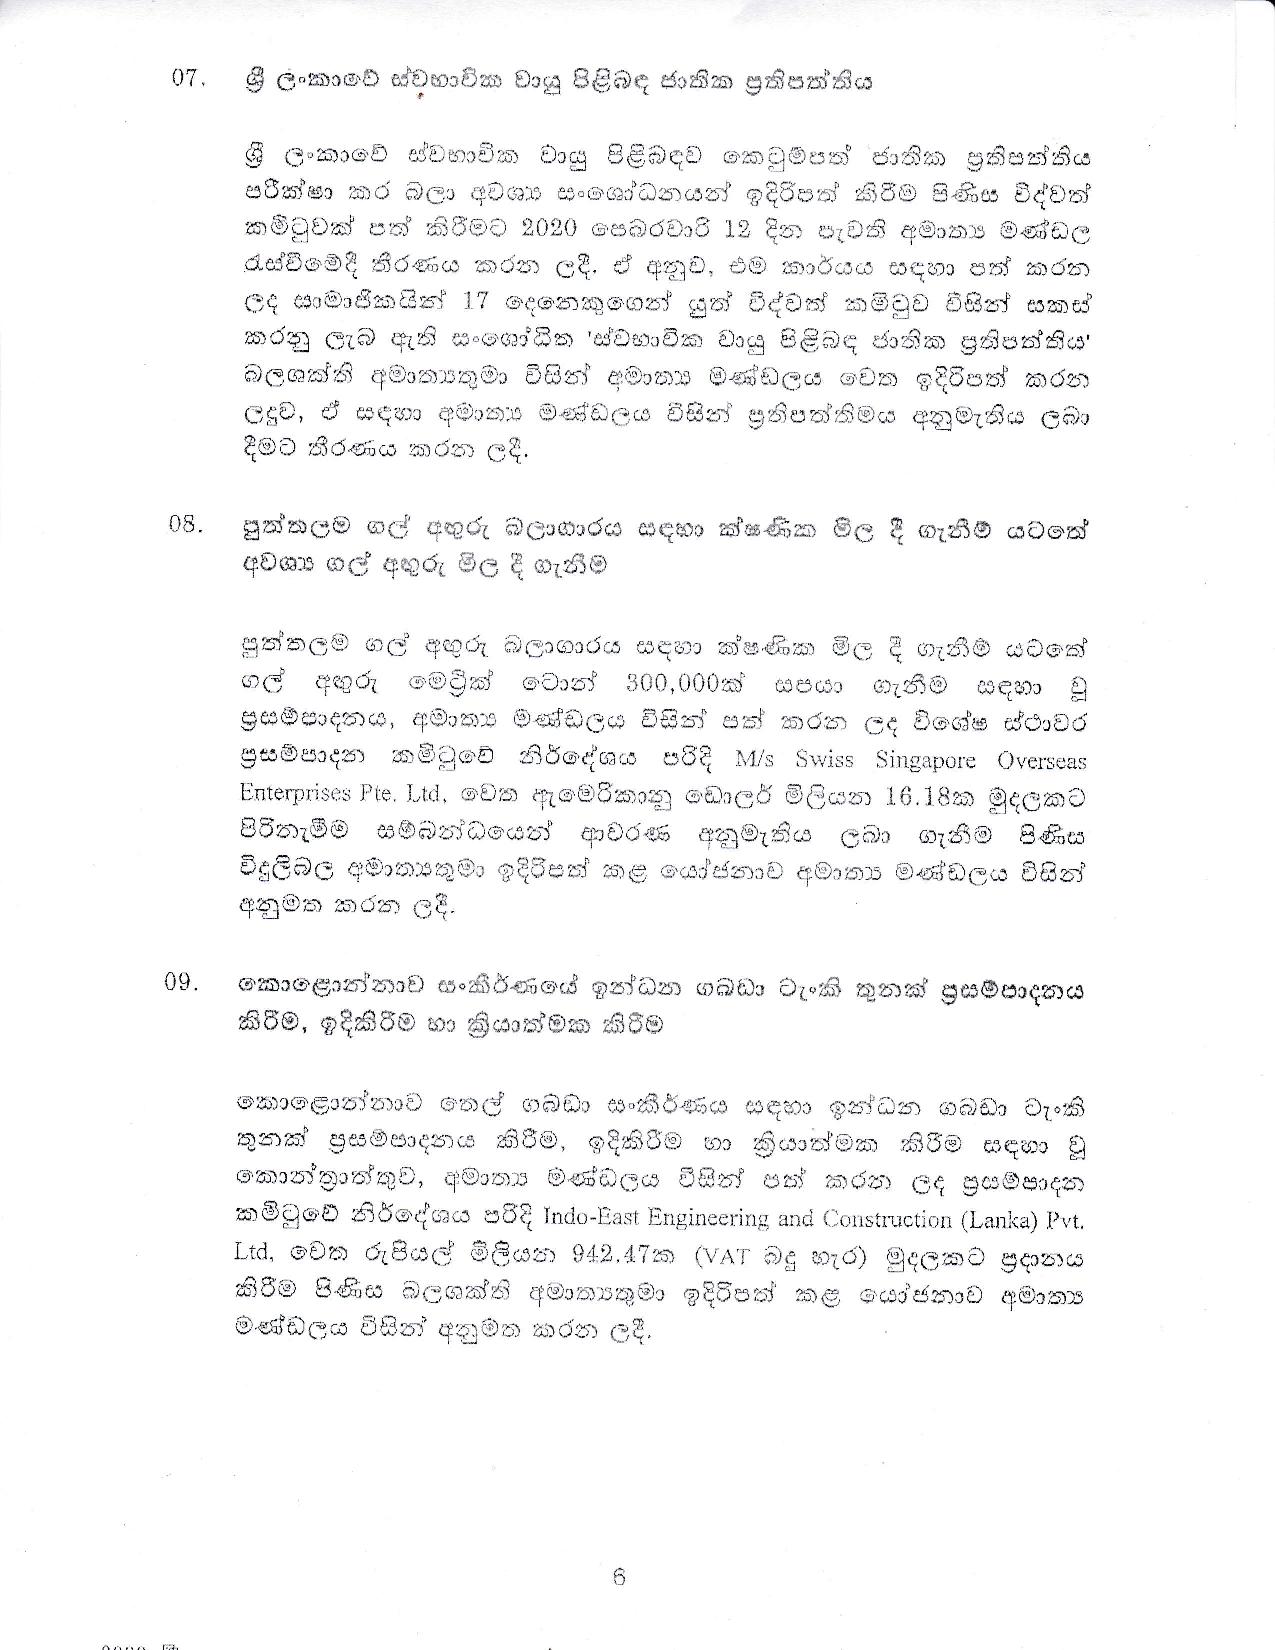 Cabinet decision on 02.09.2020 page 006